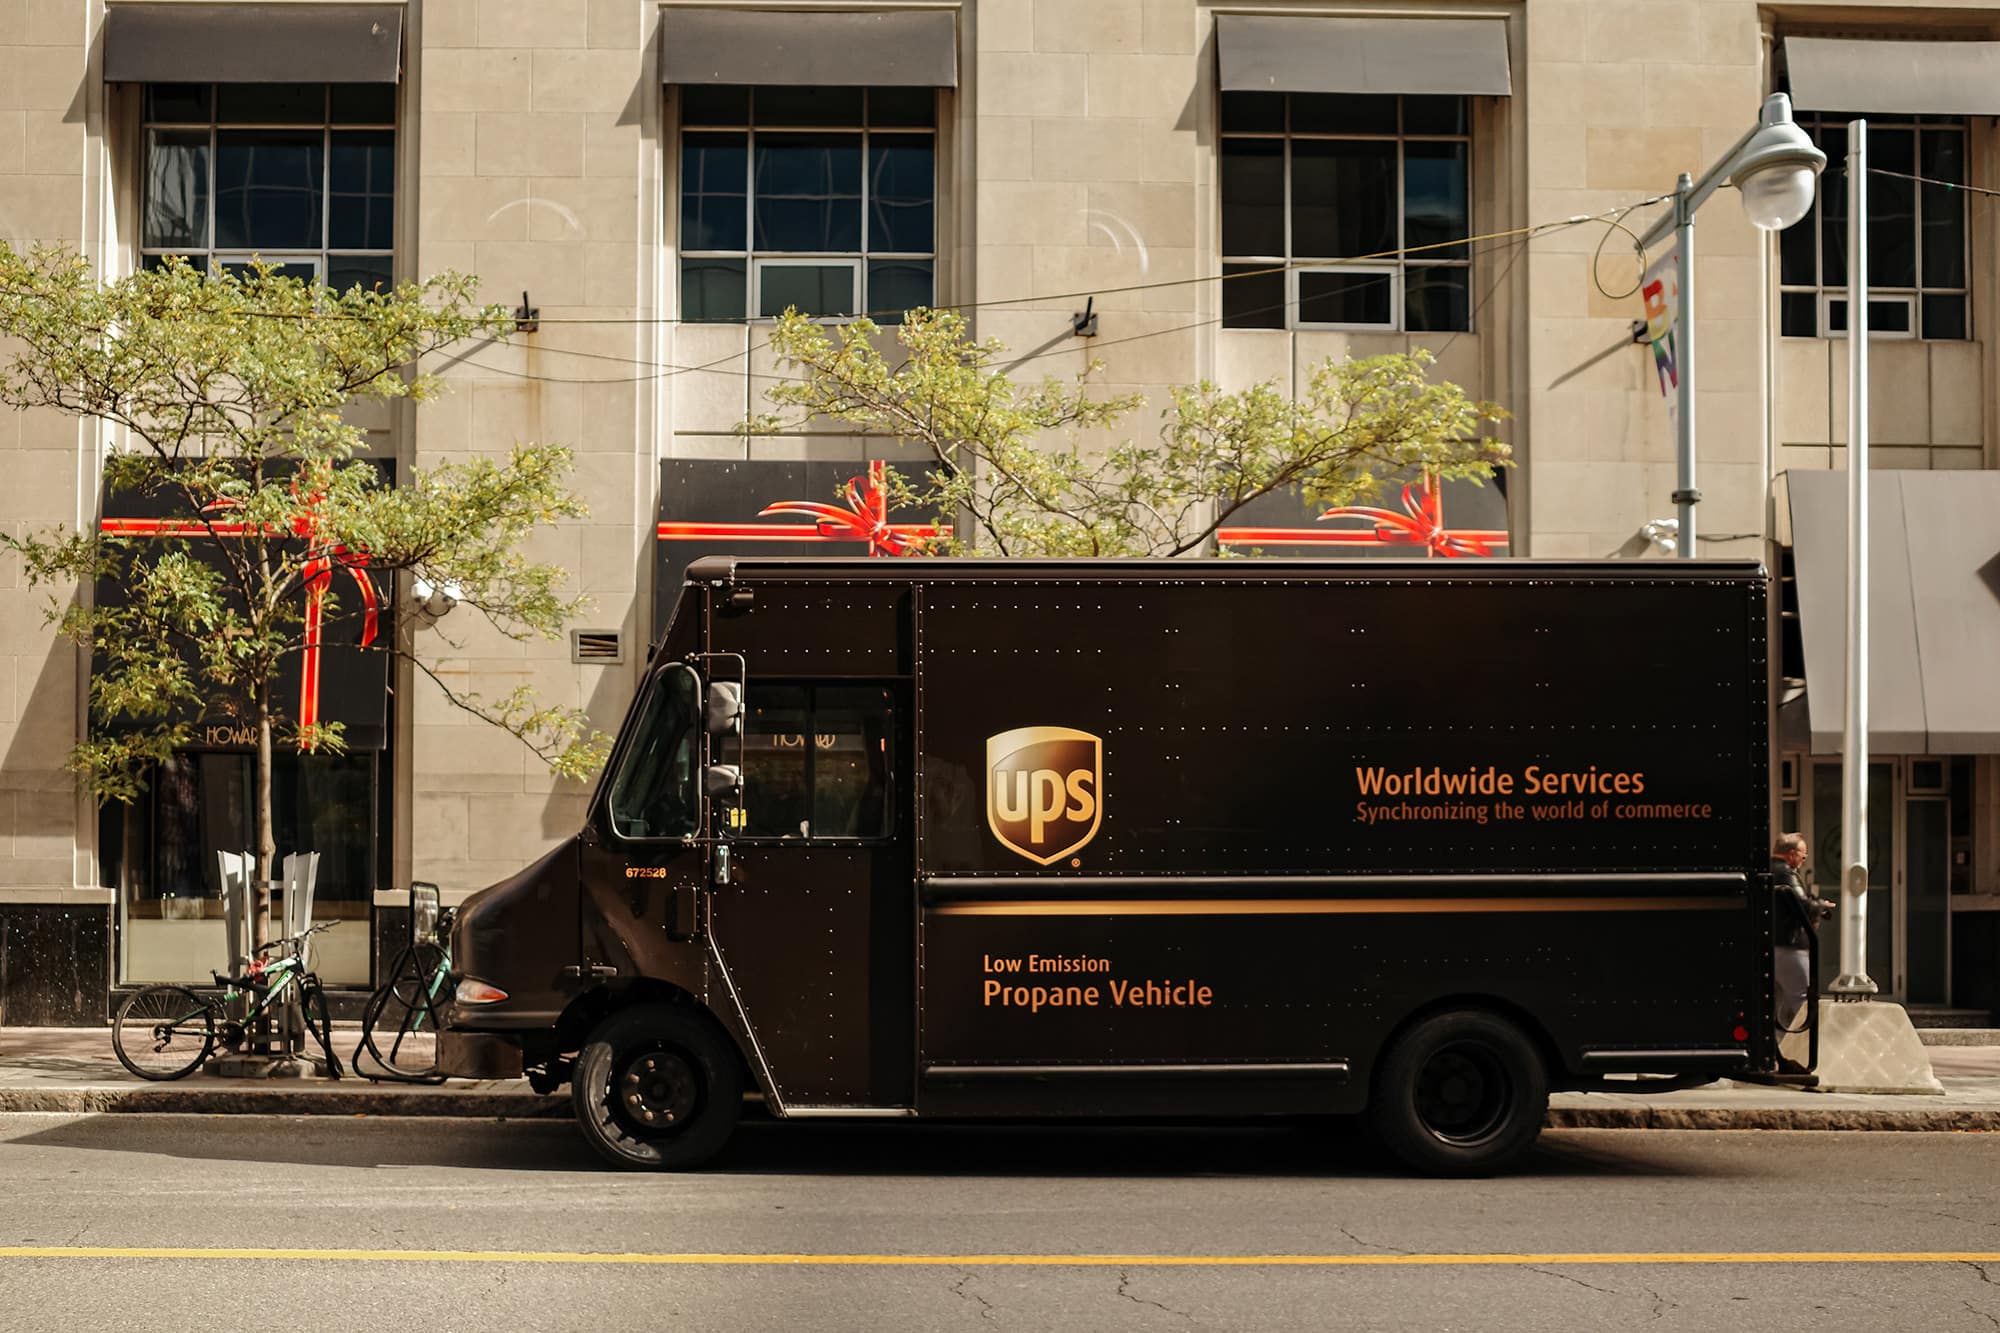 UPS delivery truck parked on a street